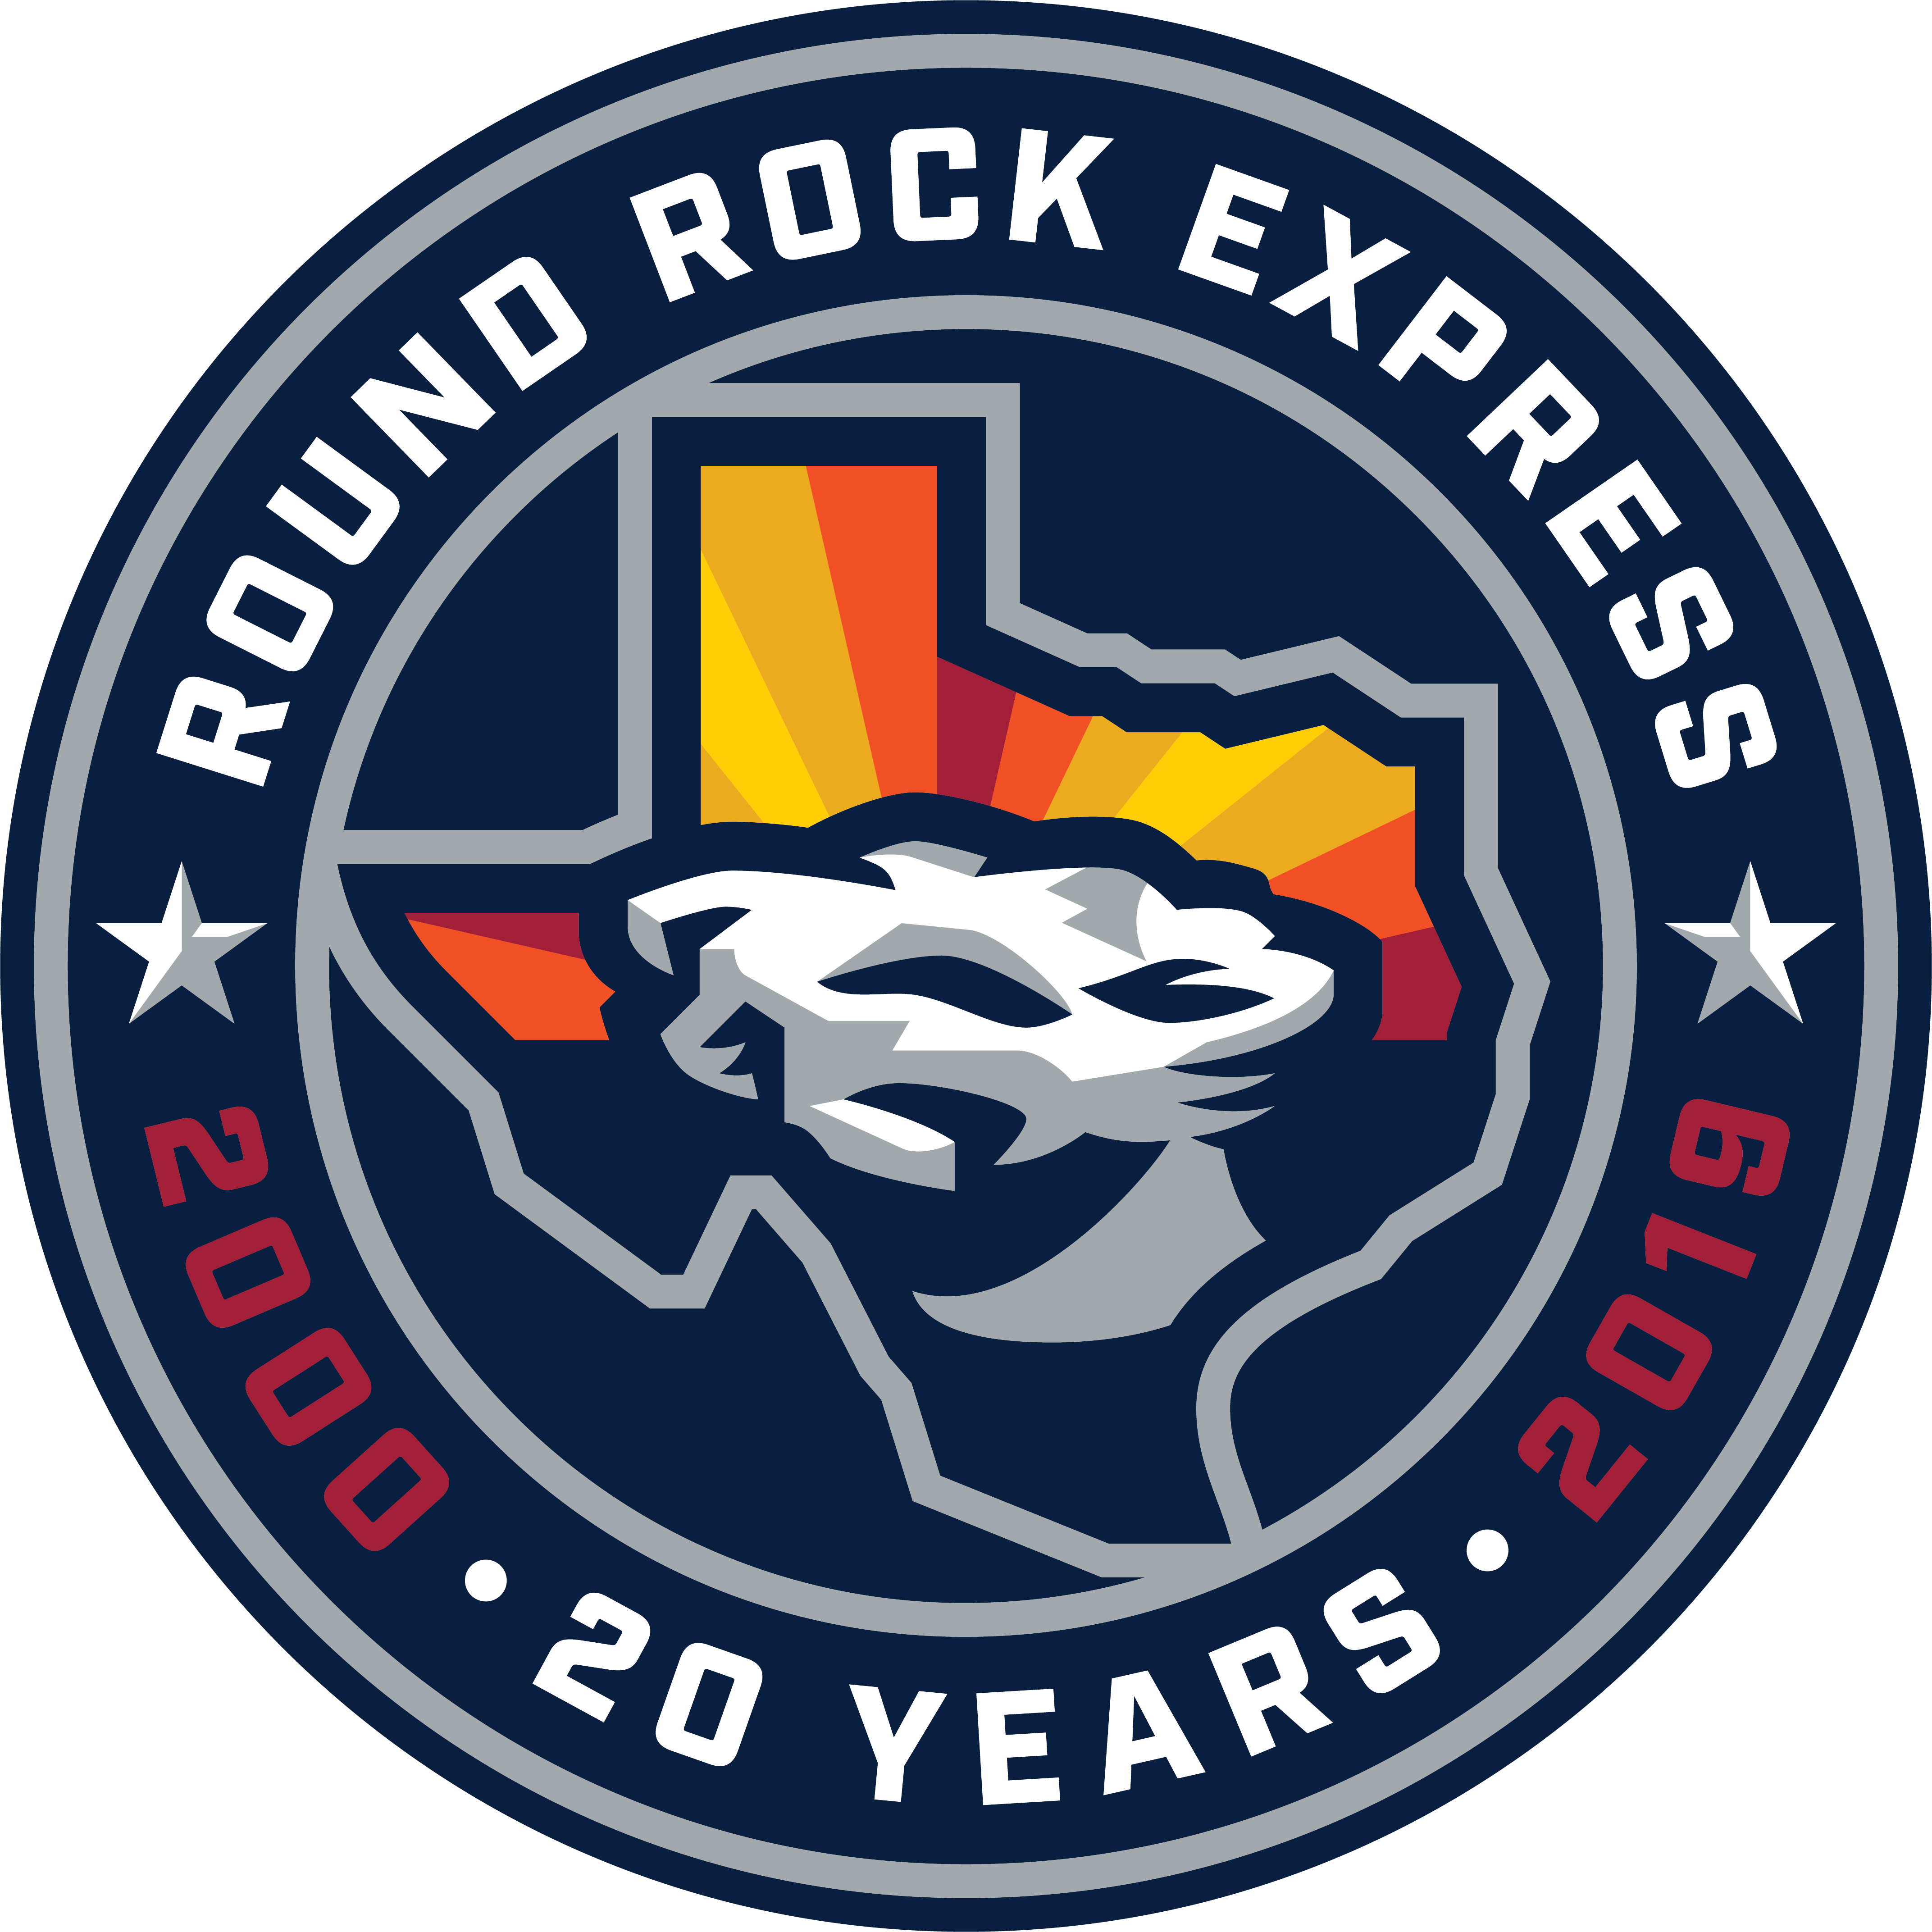 With - Round Rock Express Astros (4288x4288), Png Download